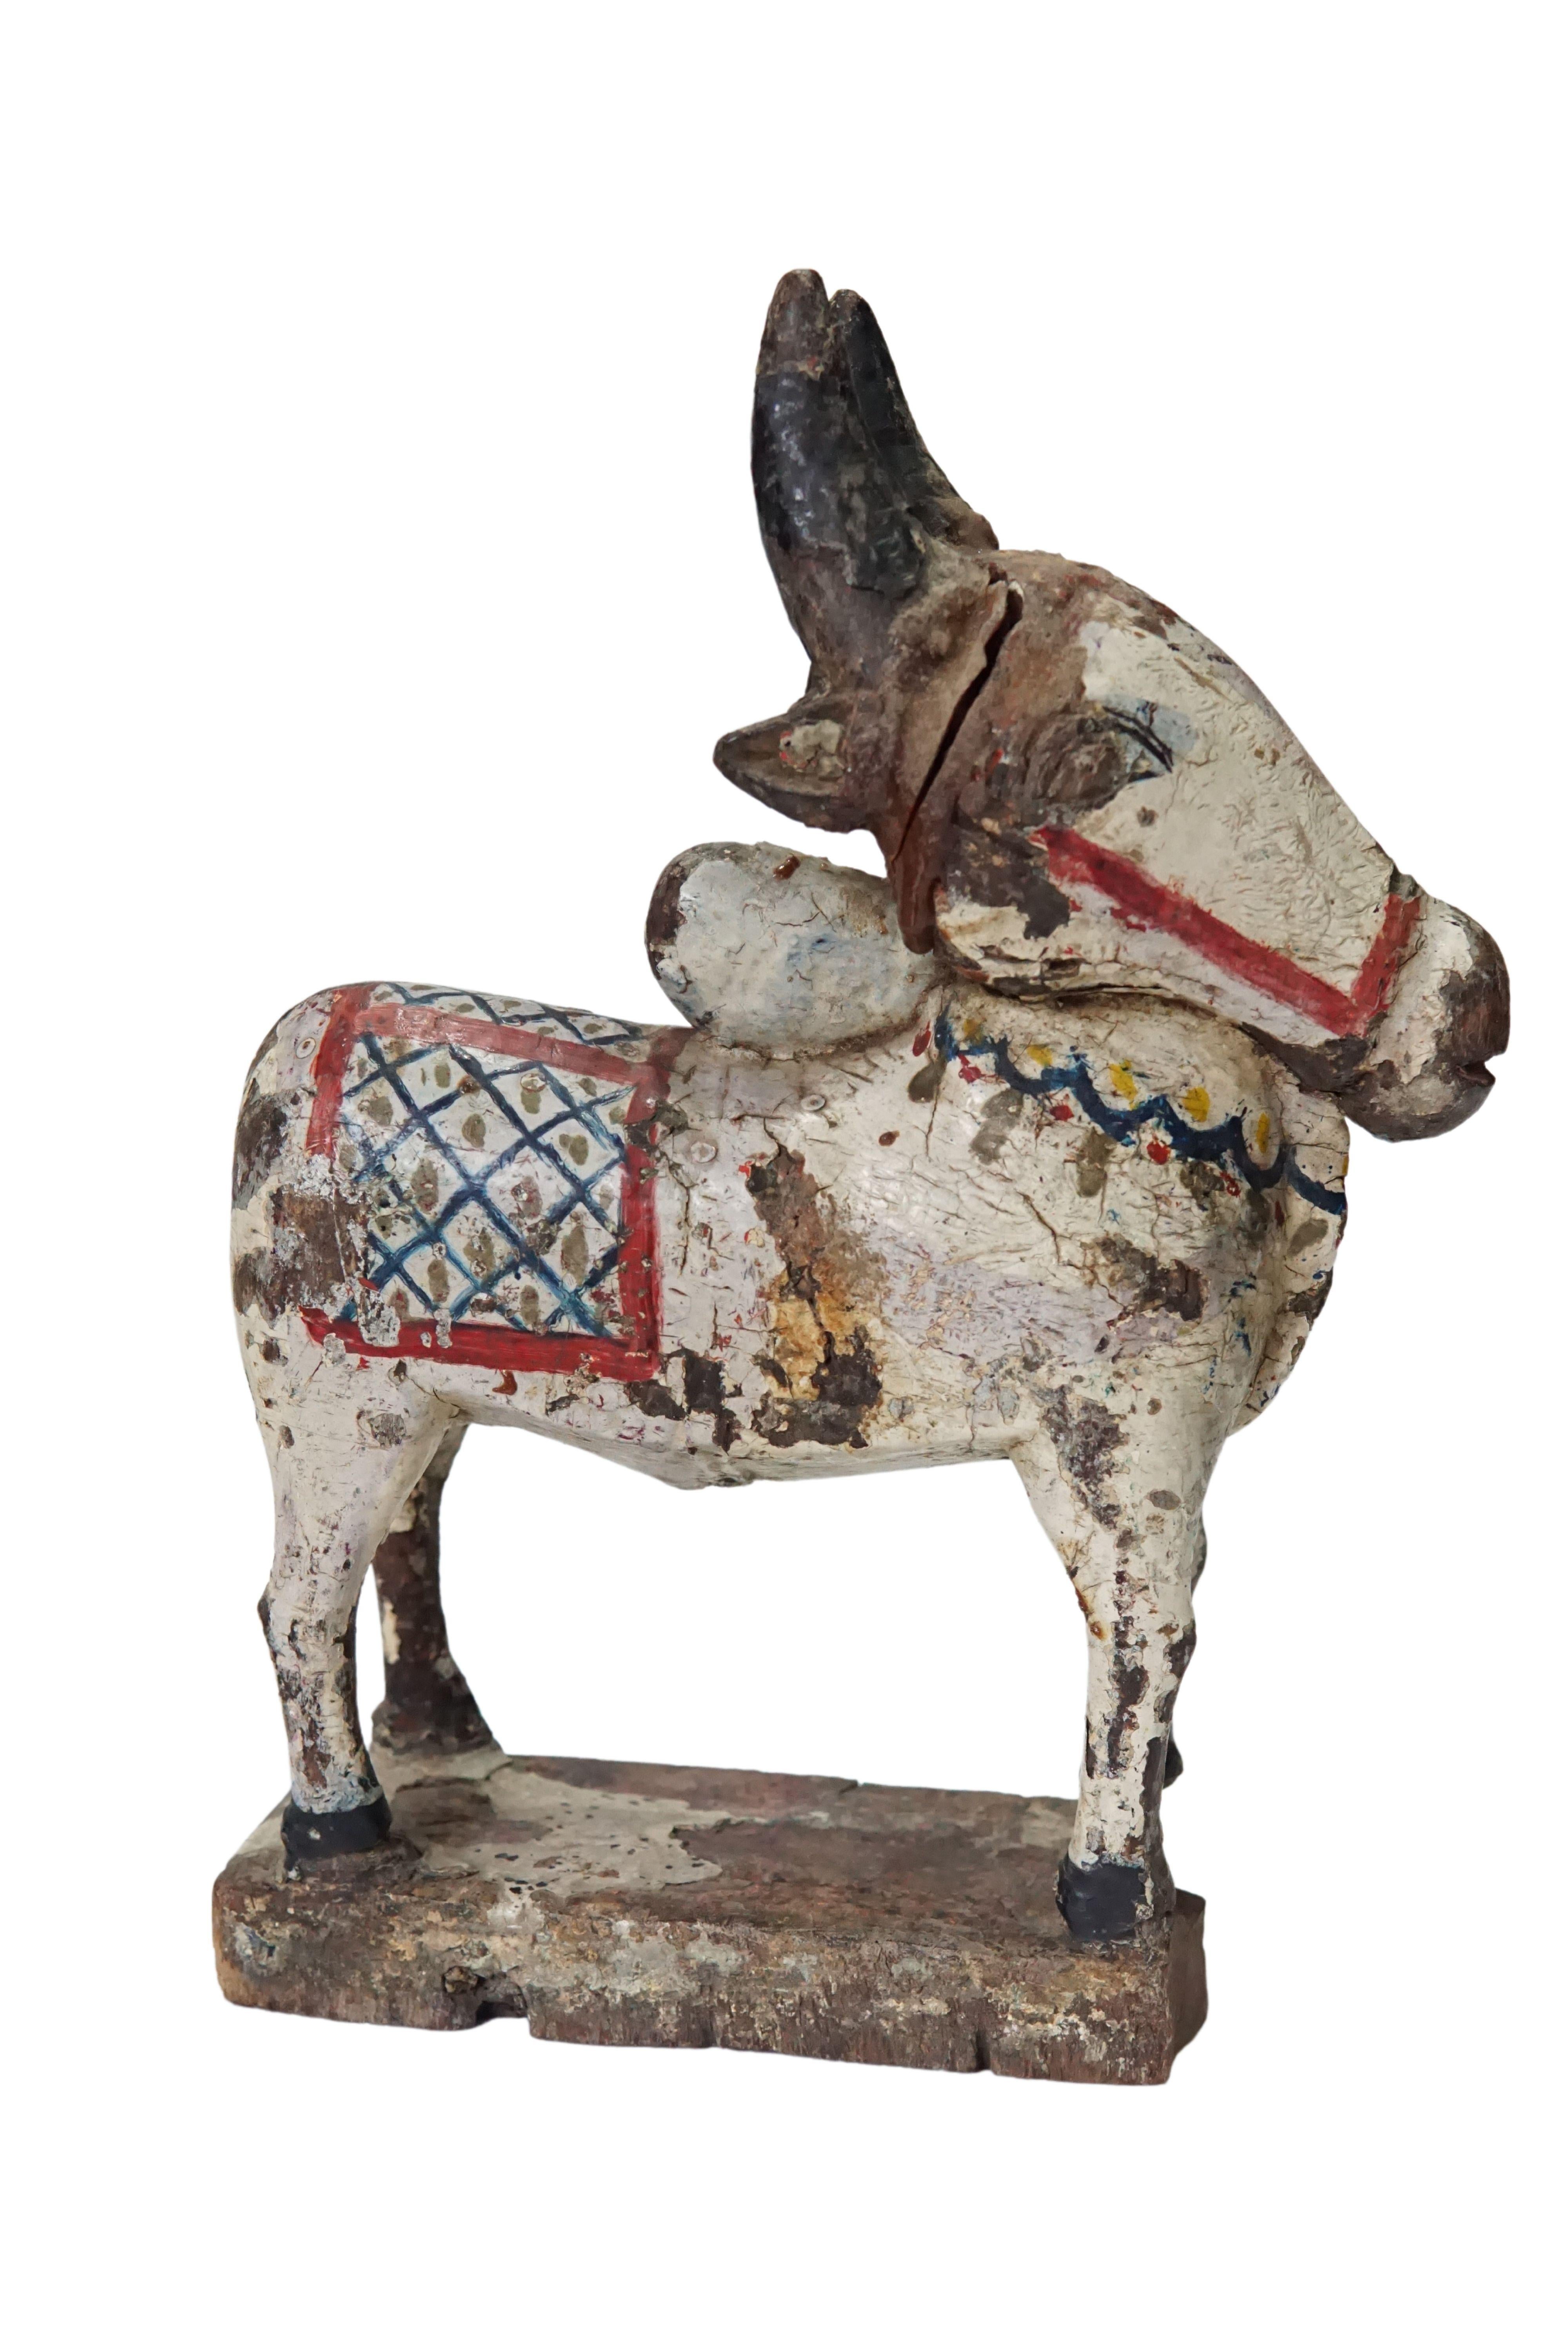 A visibly old hand-carved Nandi Cow from India. This wood sculpture features a wonderful age related patina and has been hand-painted with a mix of white and bright colours. Nandi according to Hindu mythology is a protecter of the god Shiva. Nandi